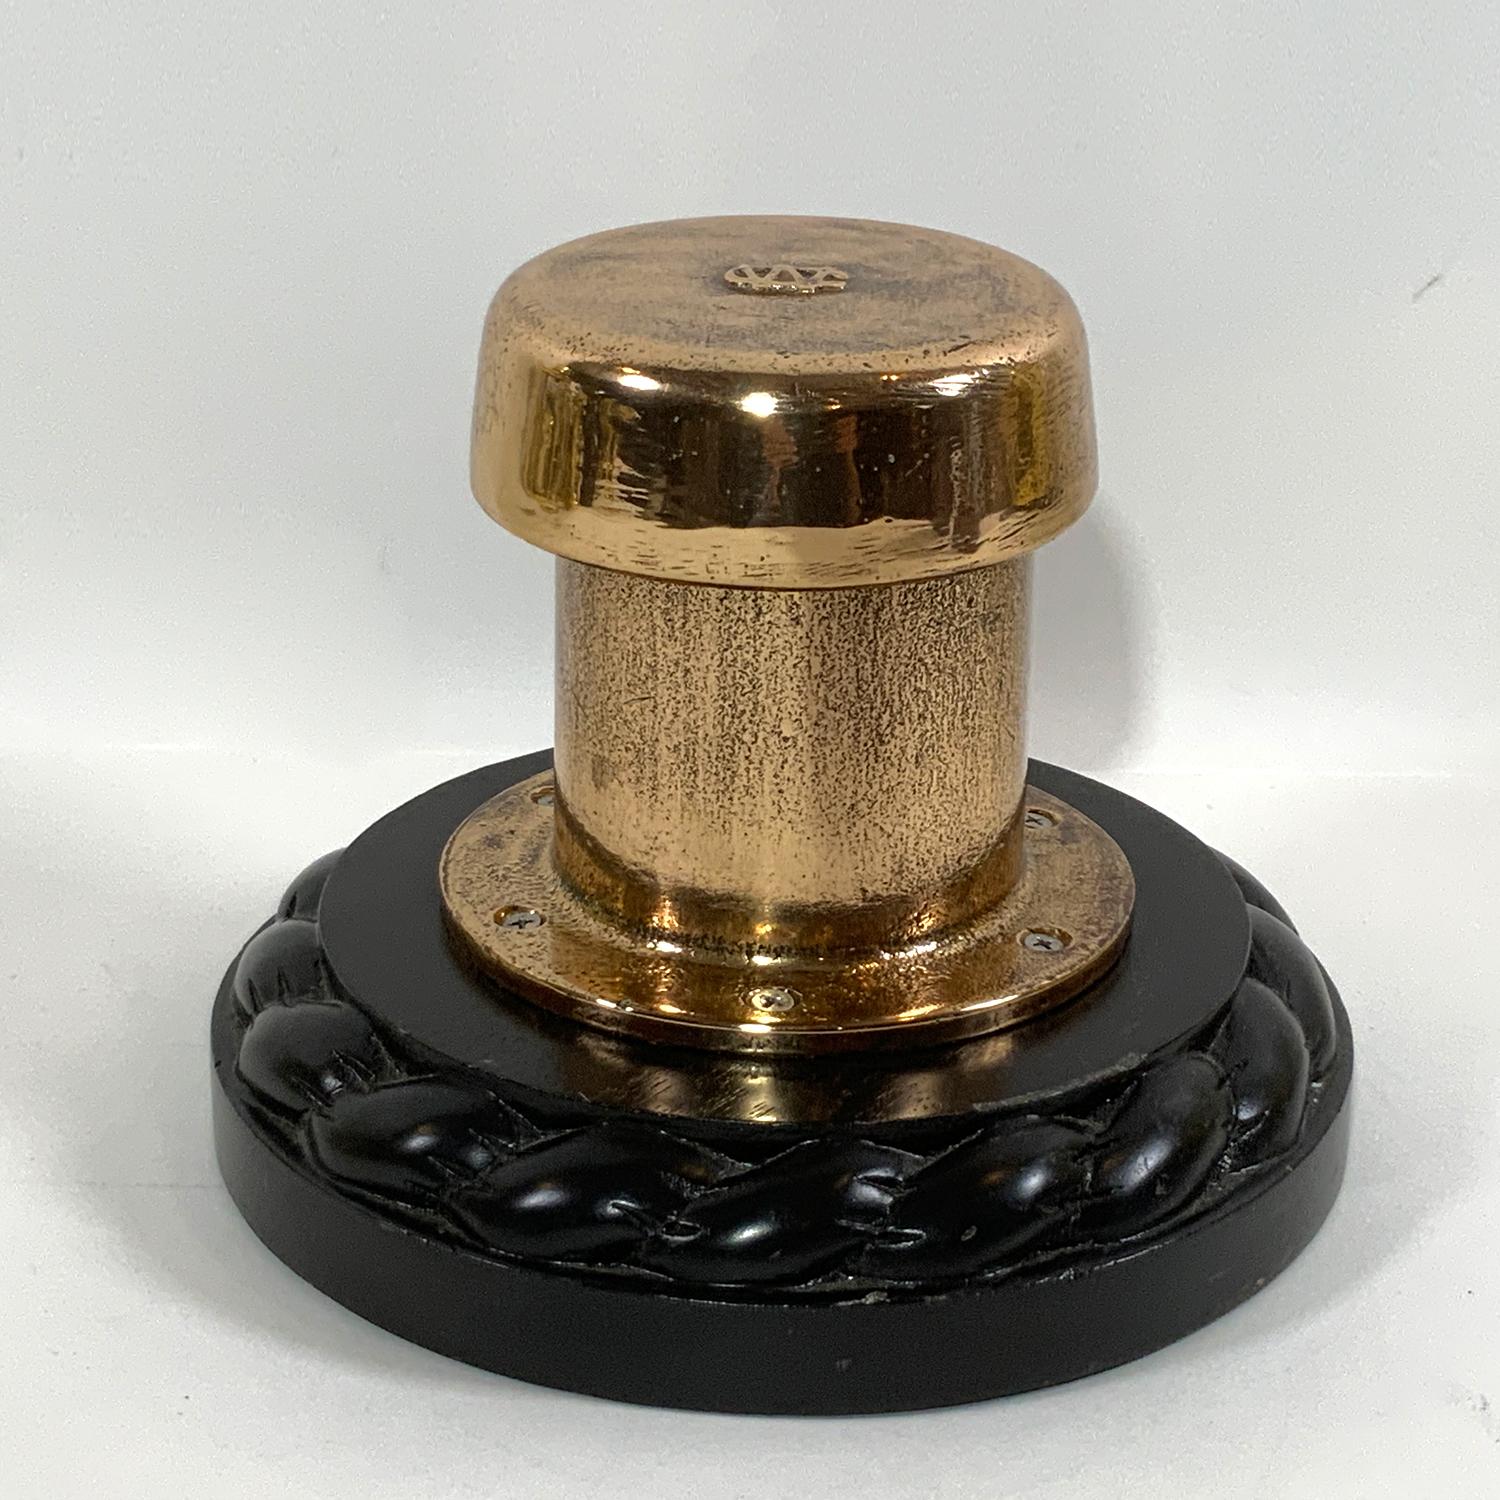 Vintage solid brass deck vent from a yacht. This relic has been professionally polished and lacquered. Mounted to a hand carved mahogany base with rope carved border. Quality maritime antique.